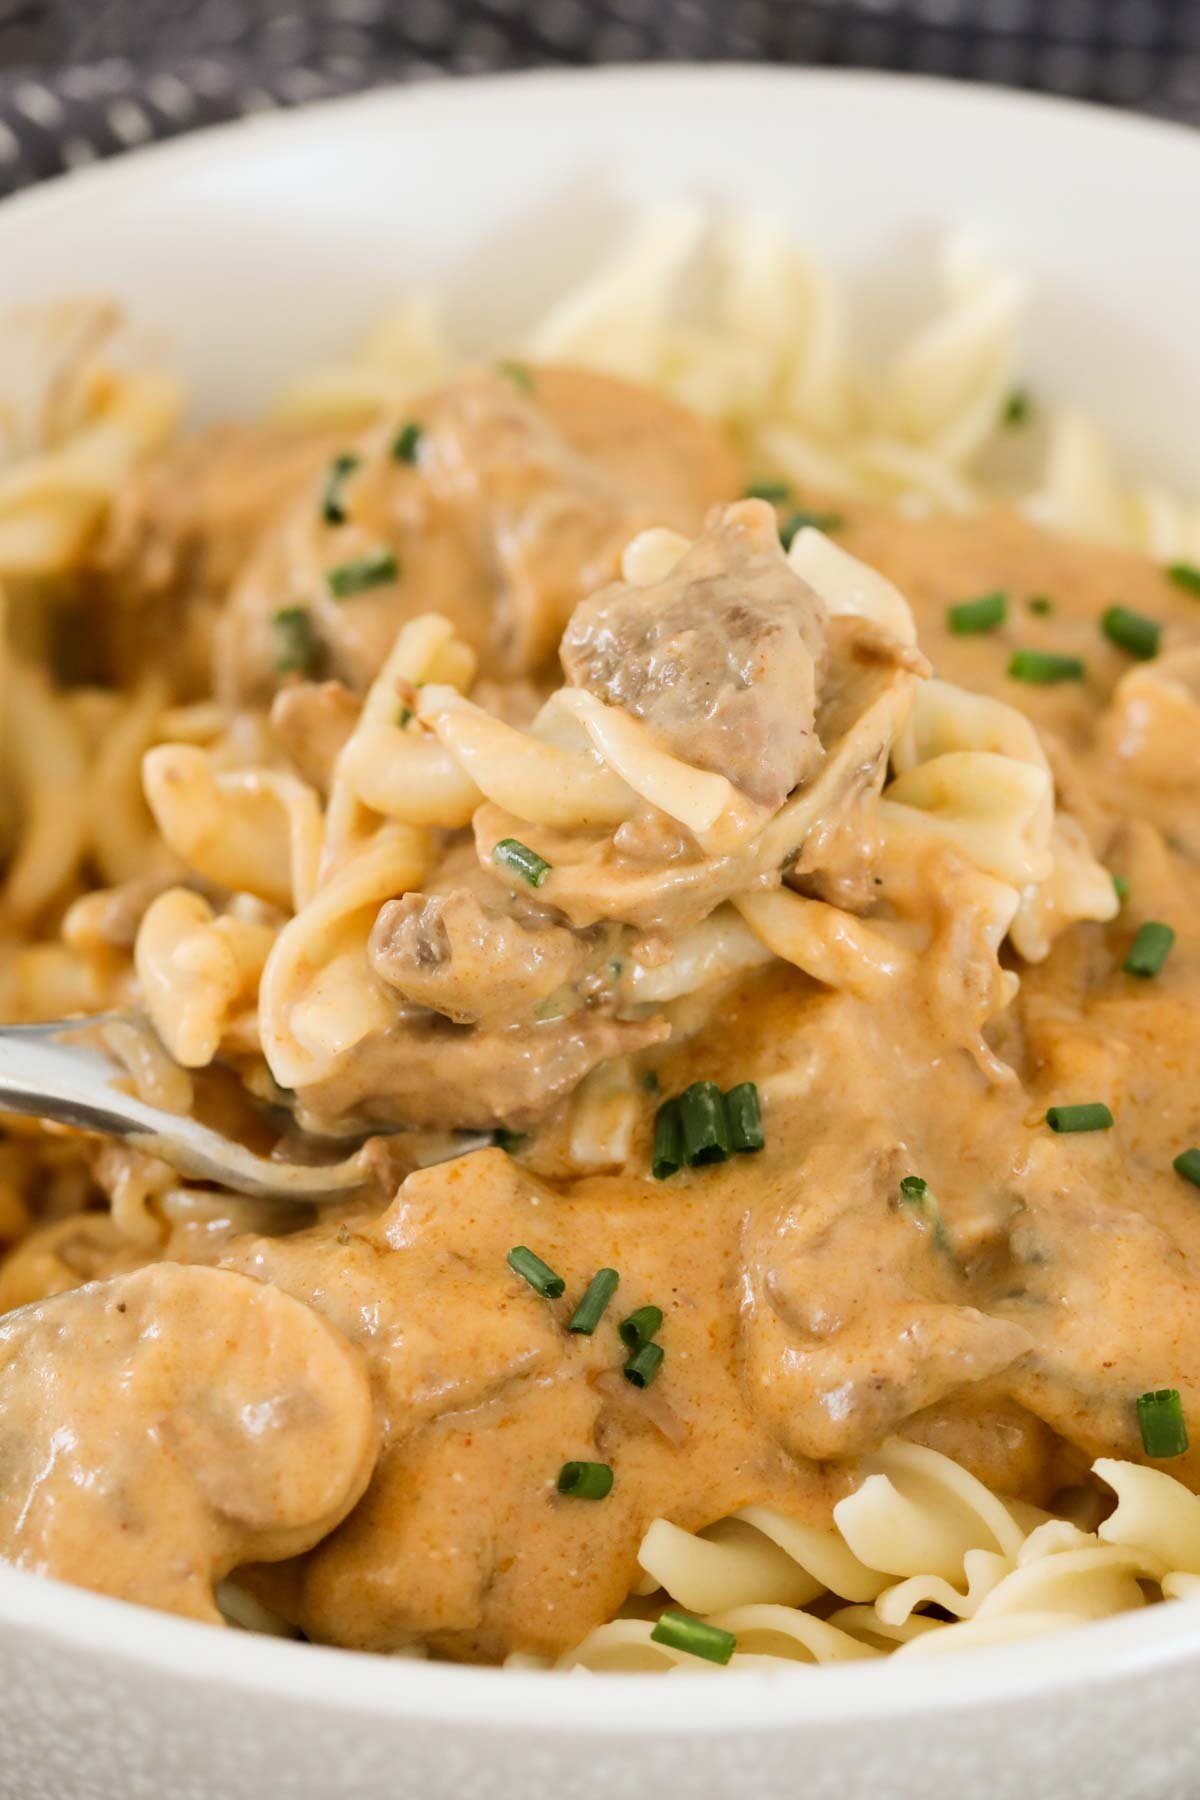 A close up of a spoonful of beef stroganoff.